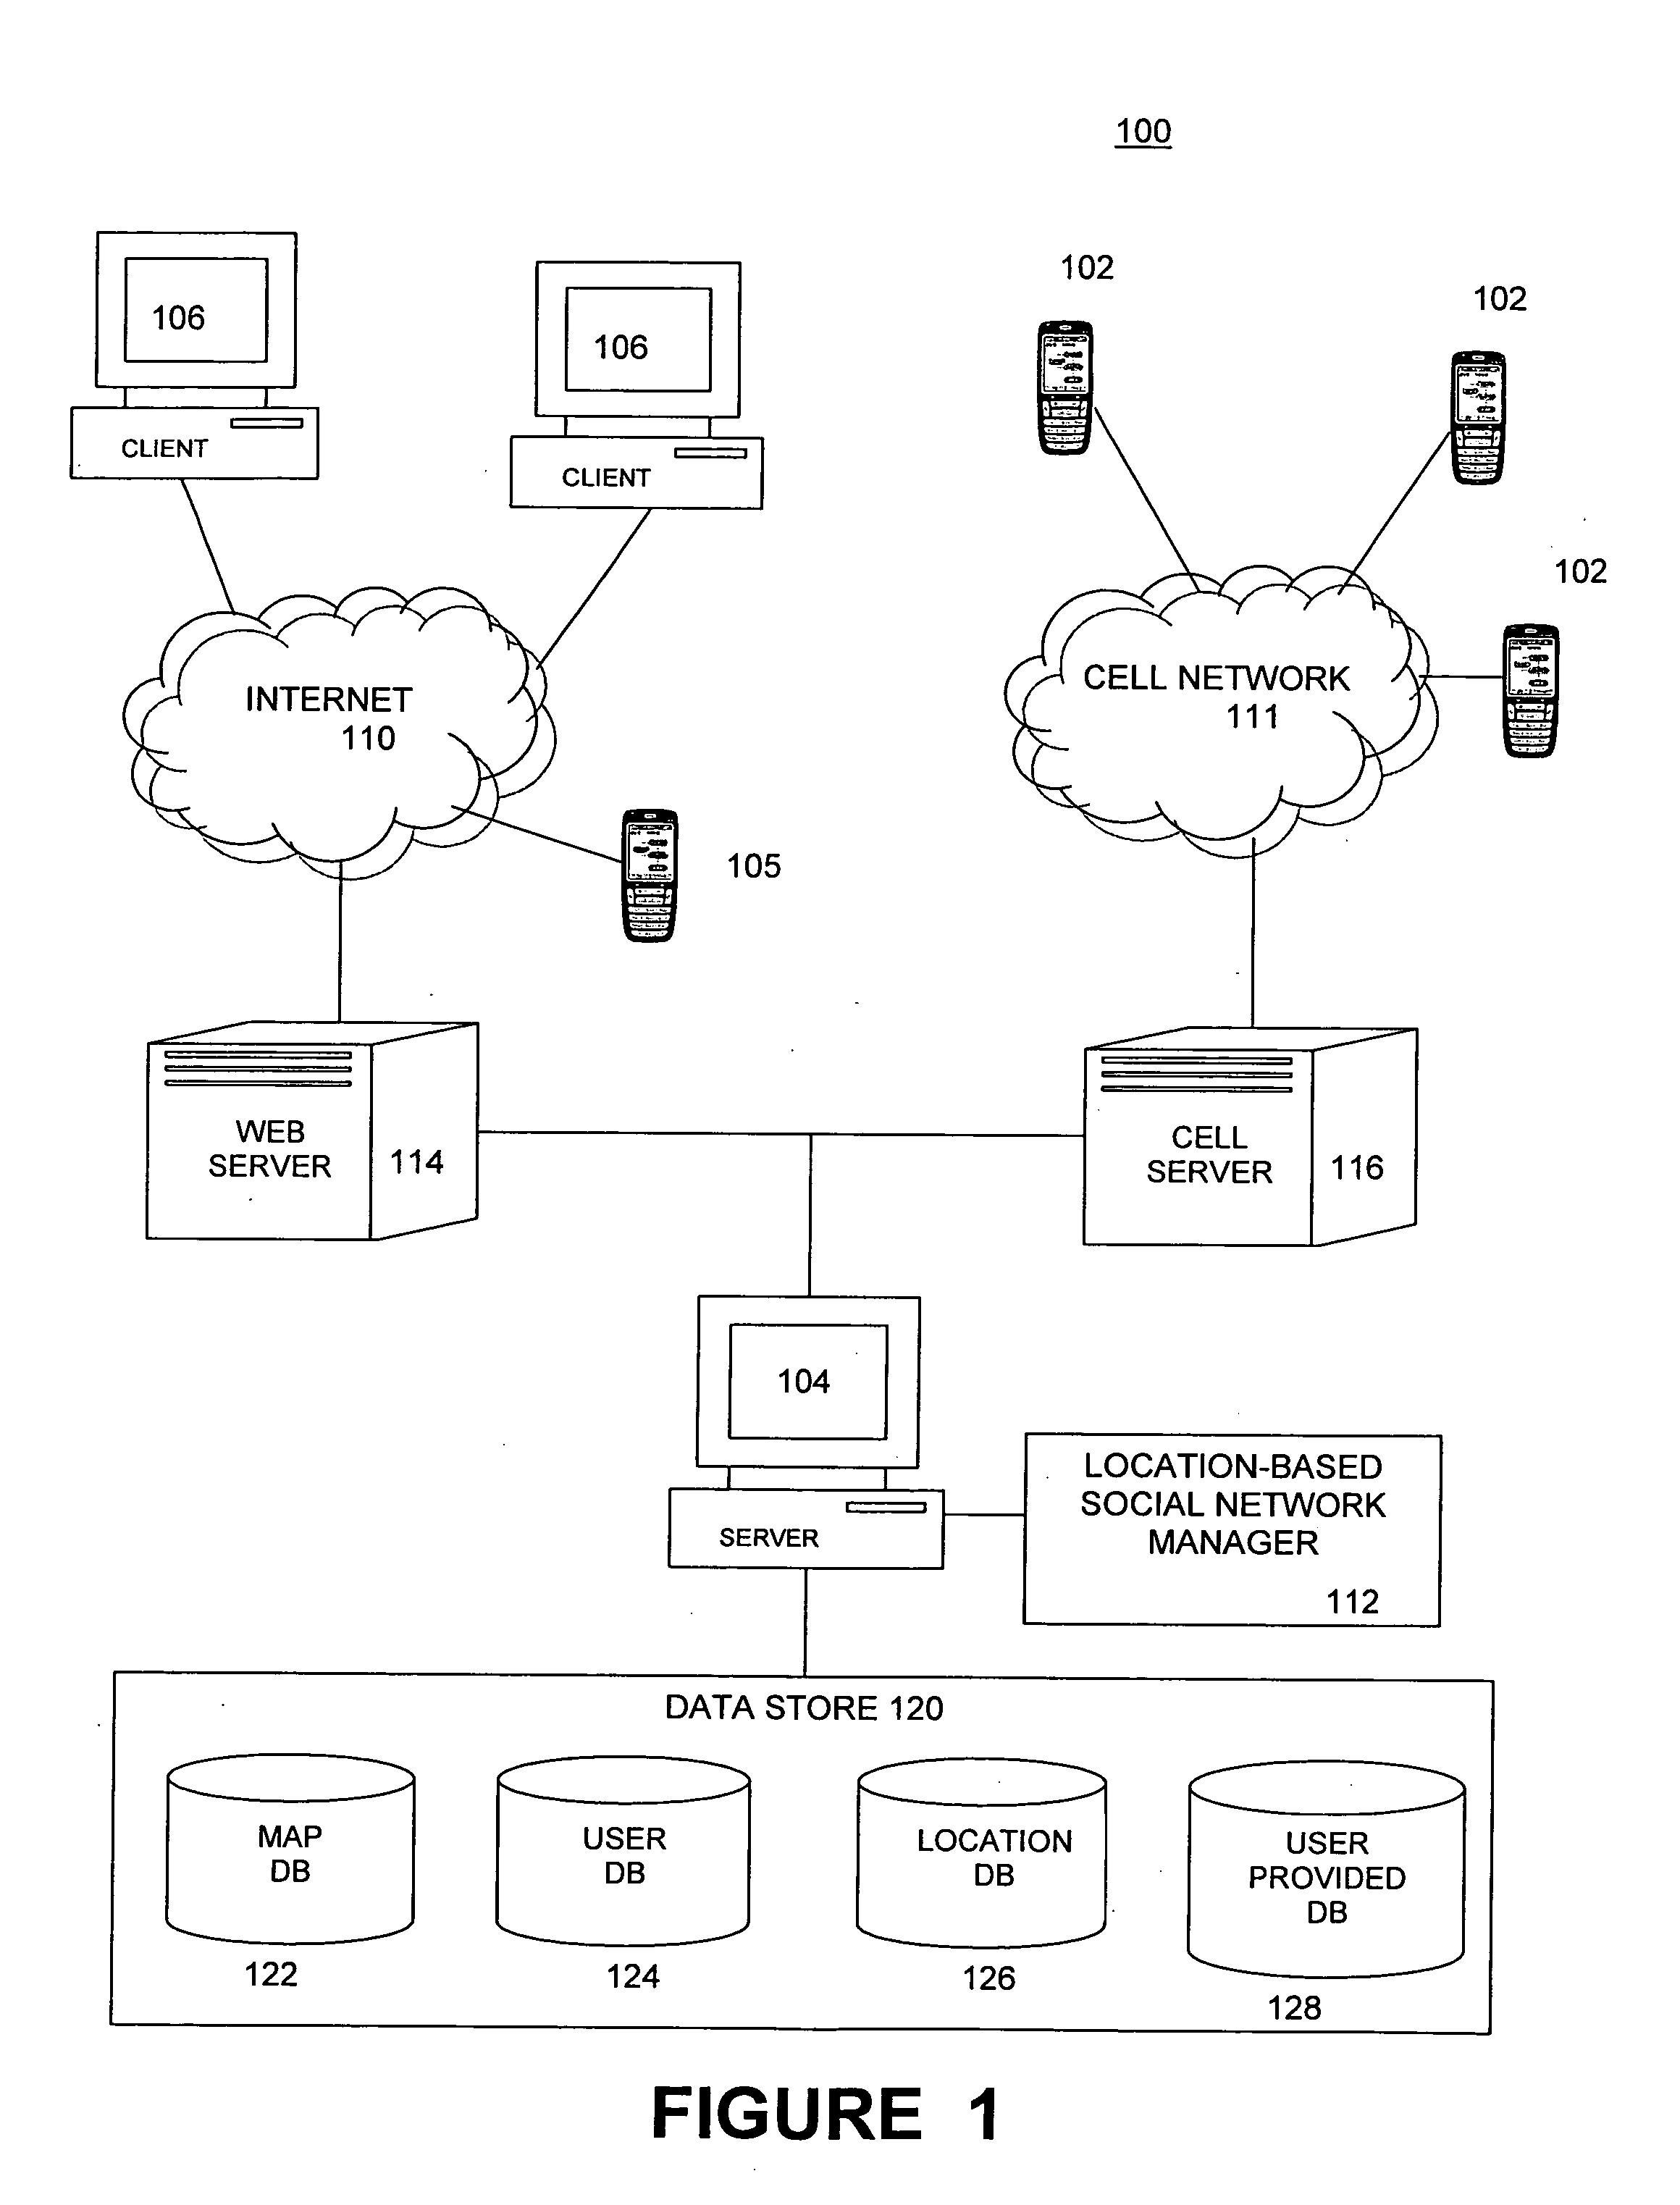 Displaying and tagging places of interest on location-aware mobile communication devices in a local area network